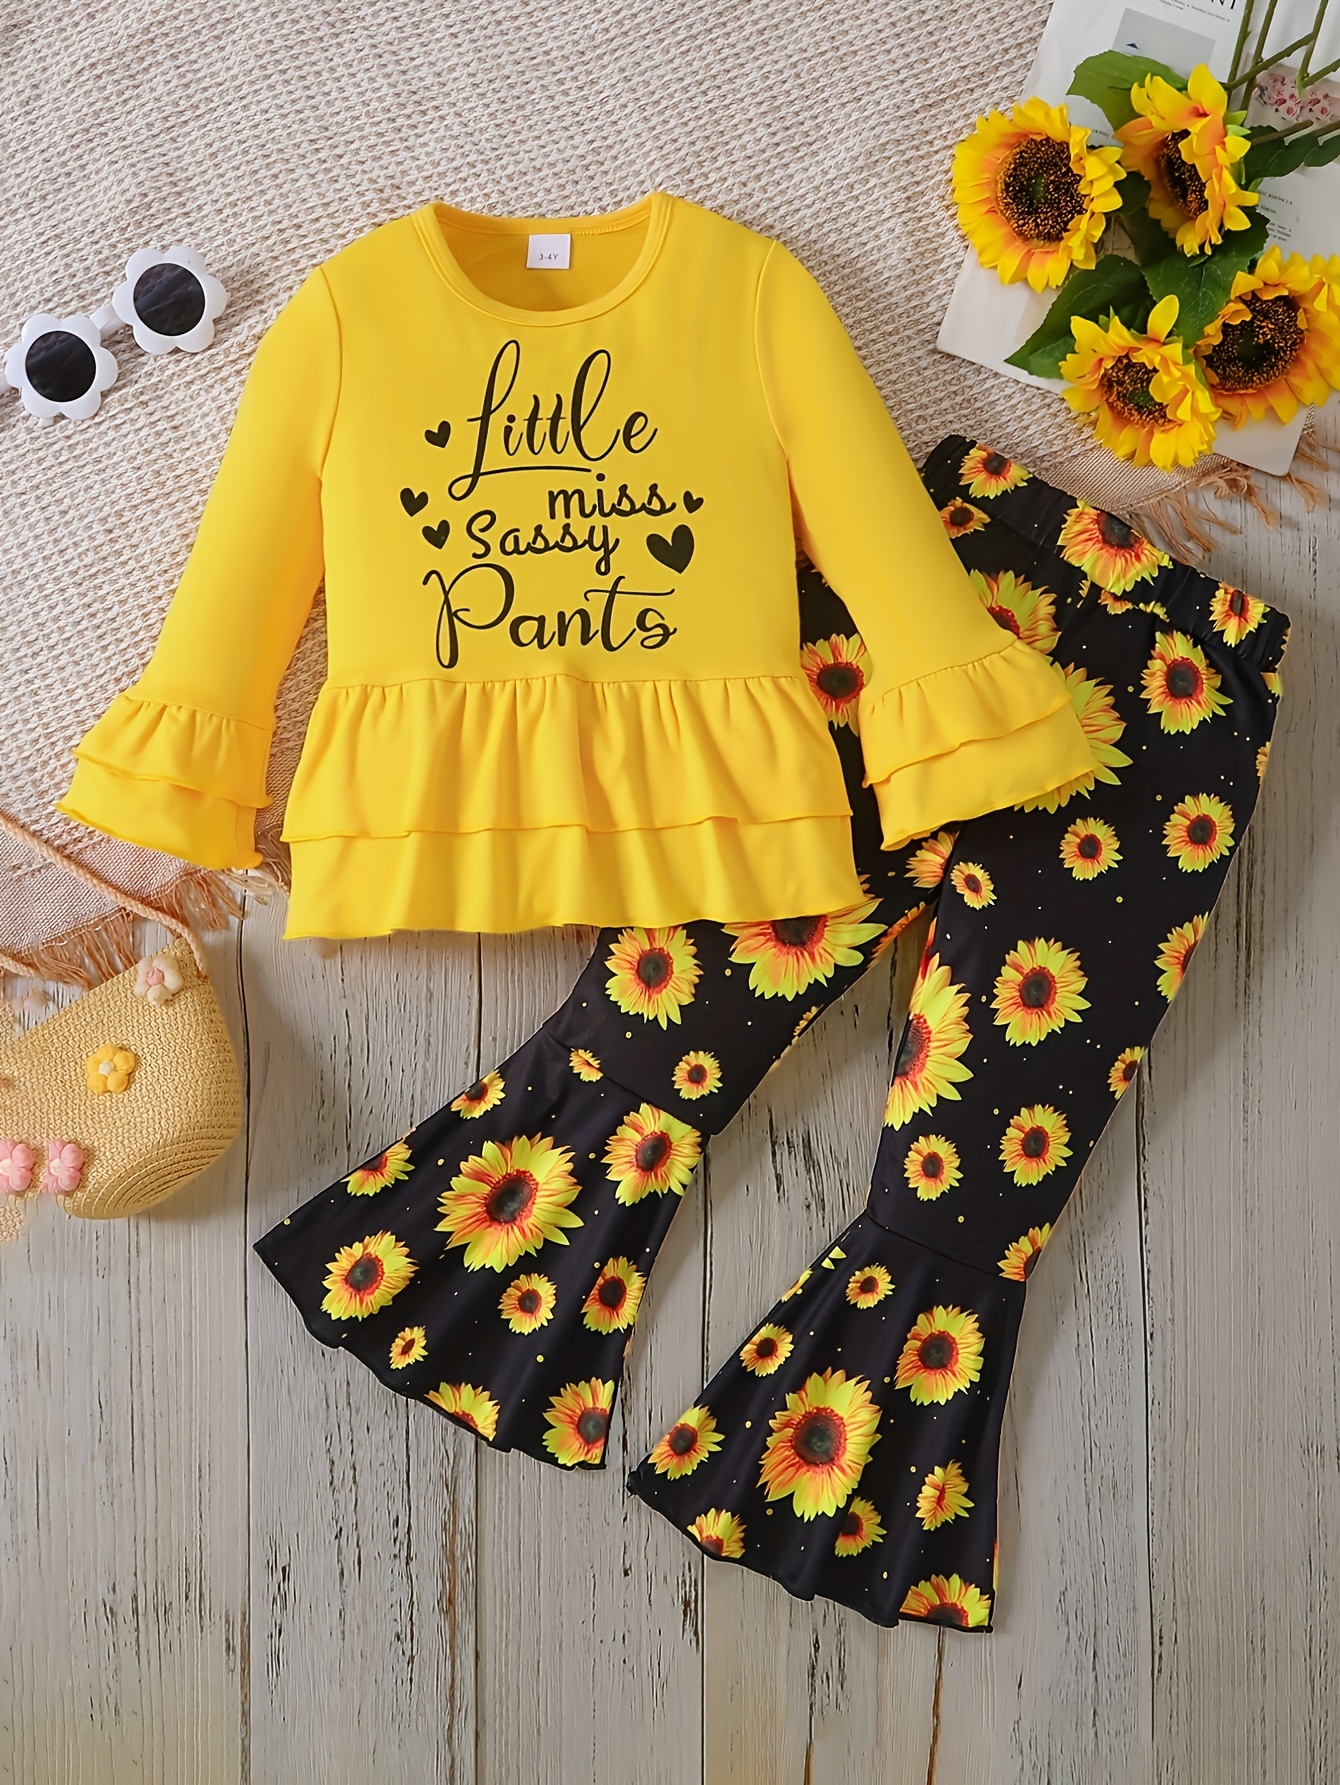 Baby Boy Clothes 4 5 Years Toddler Boutique Outfits Fashion Print